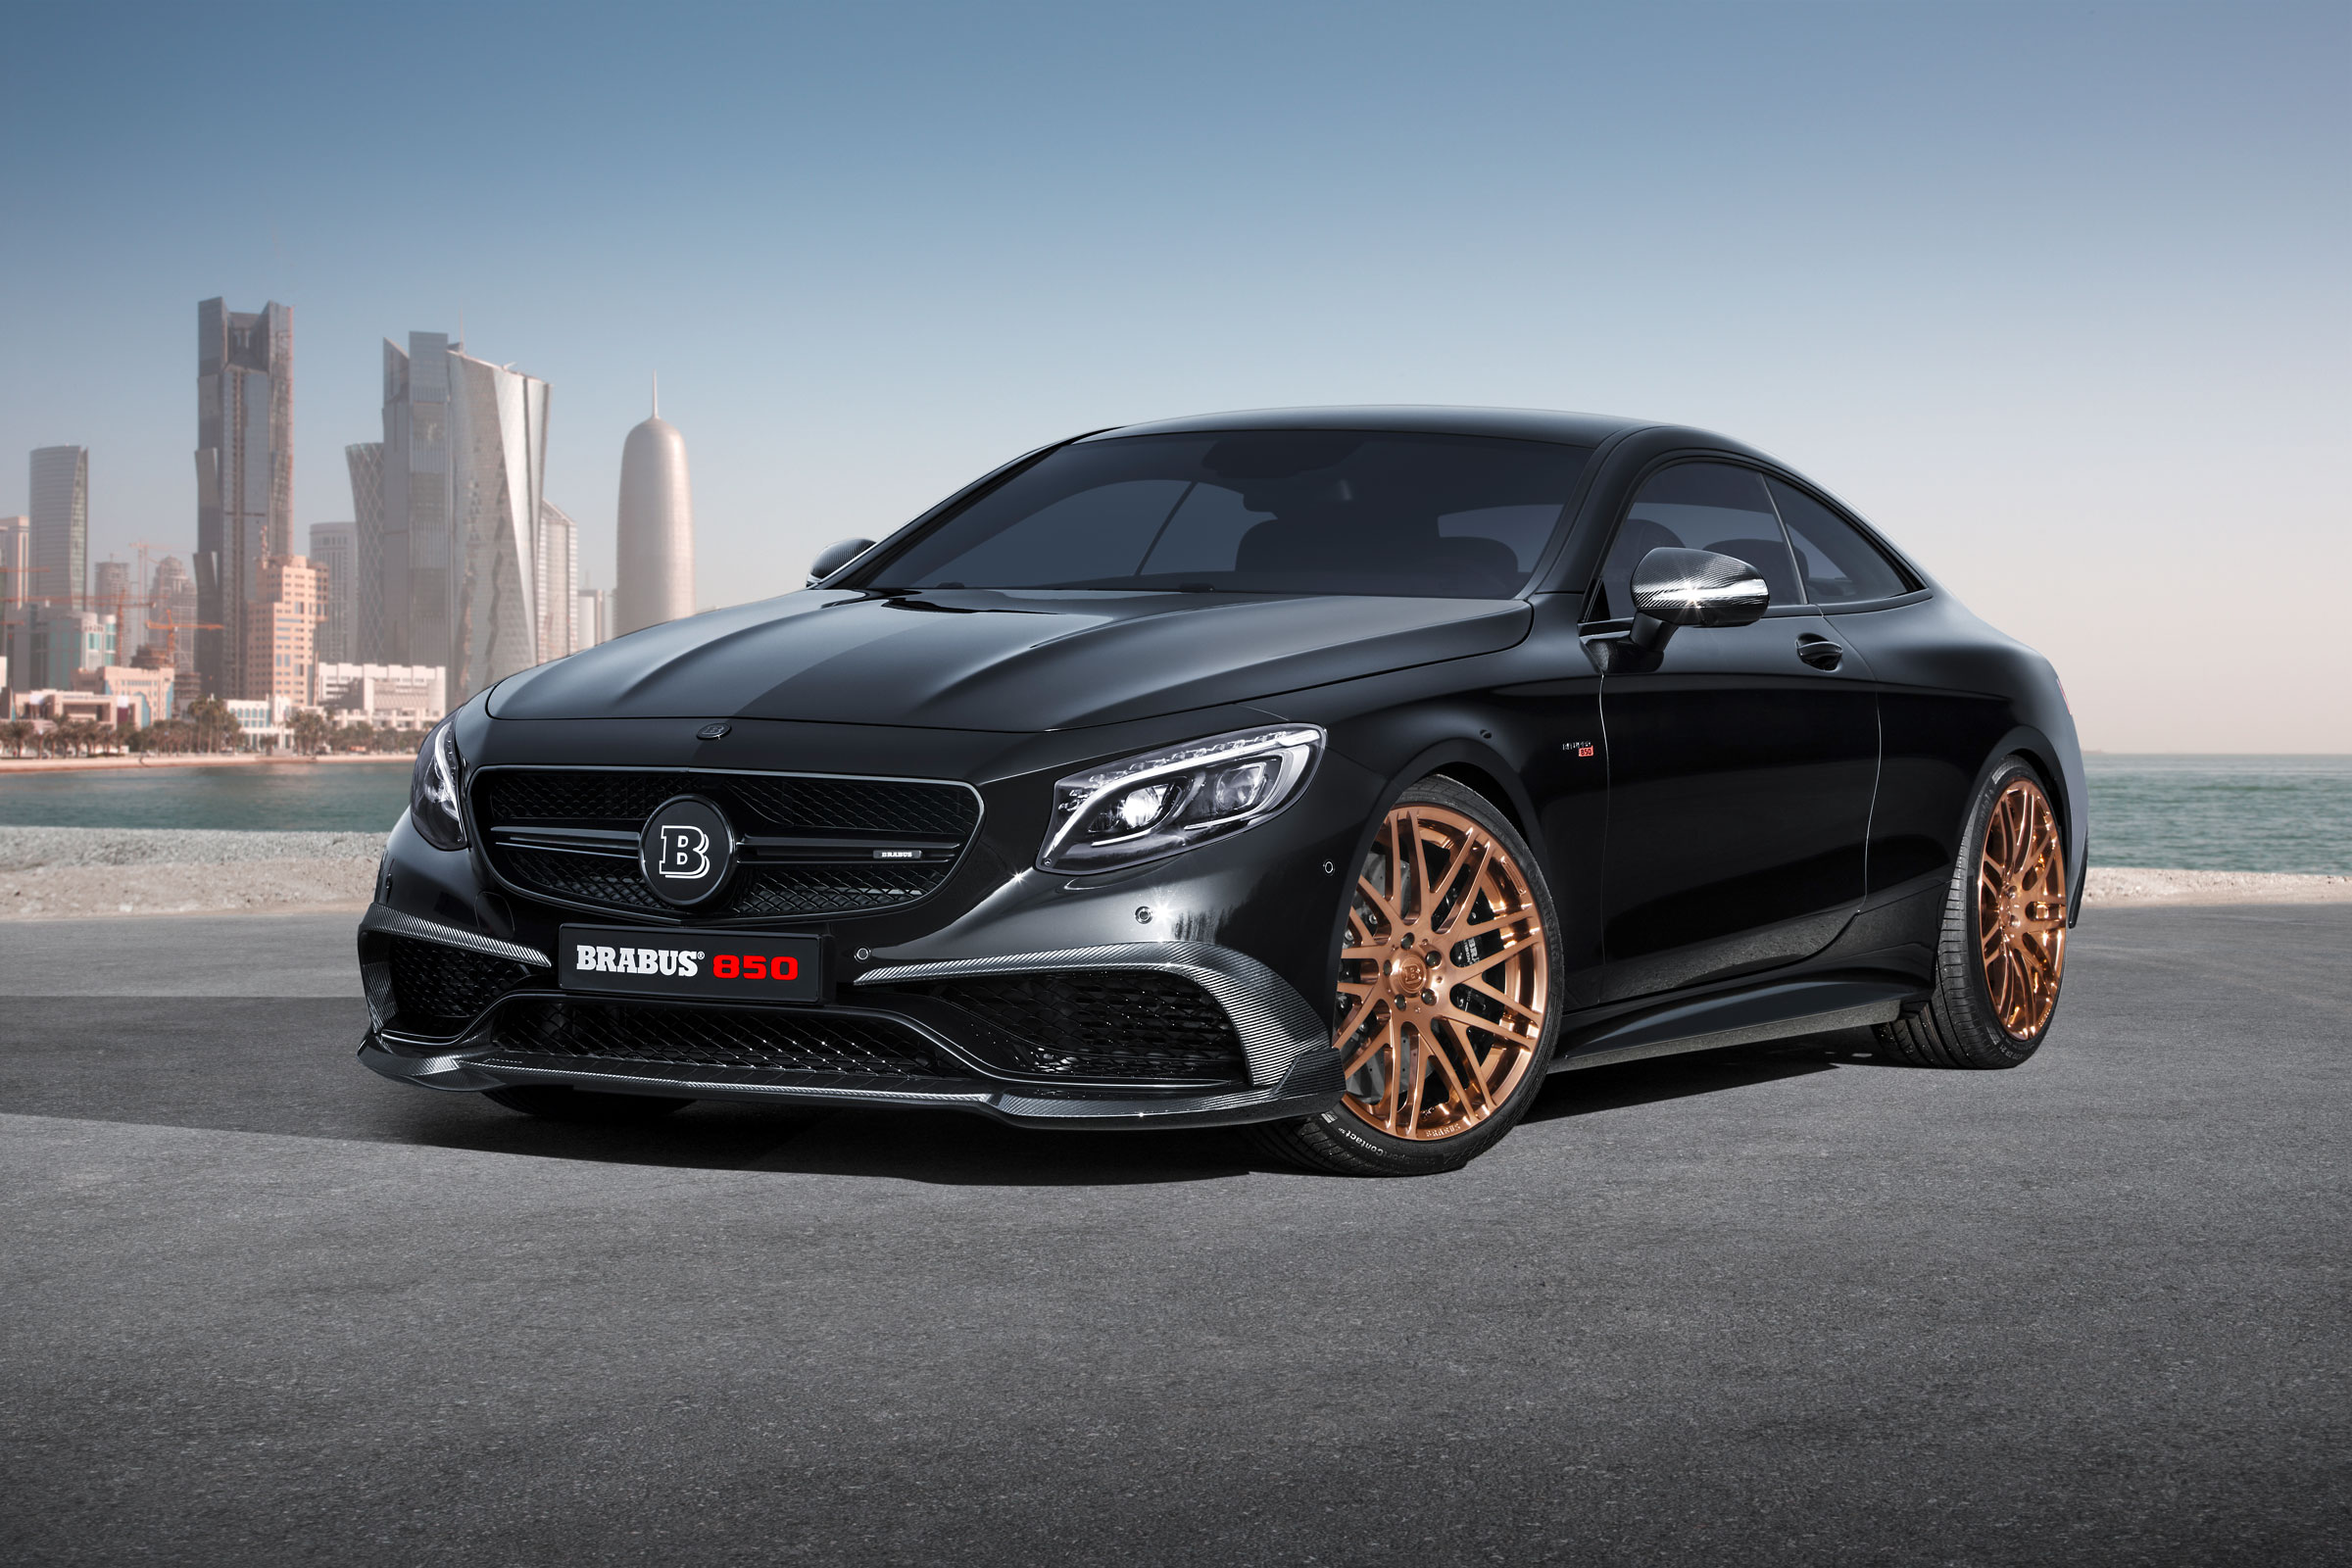 New Brabus S 63 850 Biturbo Coupe is limited to 217mph 